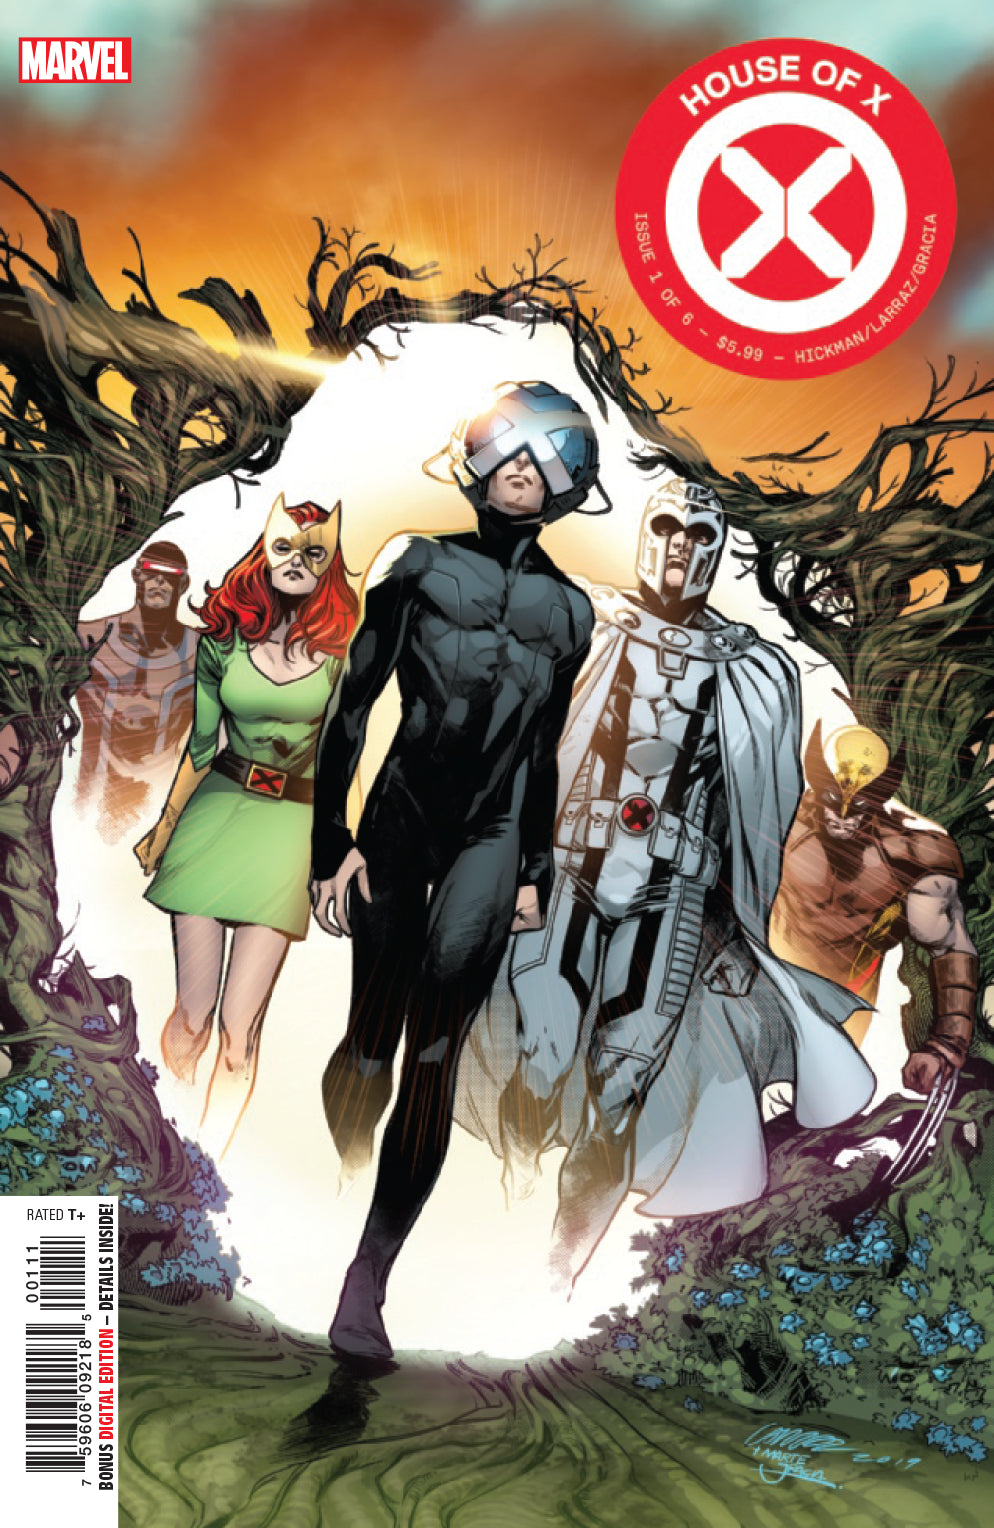 HOUSE OF X #1 (OF 6) 1ST PRINT